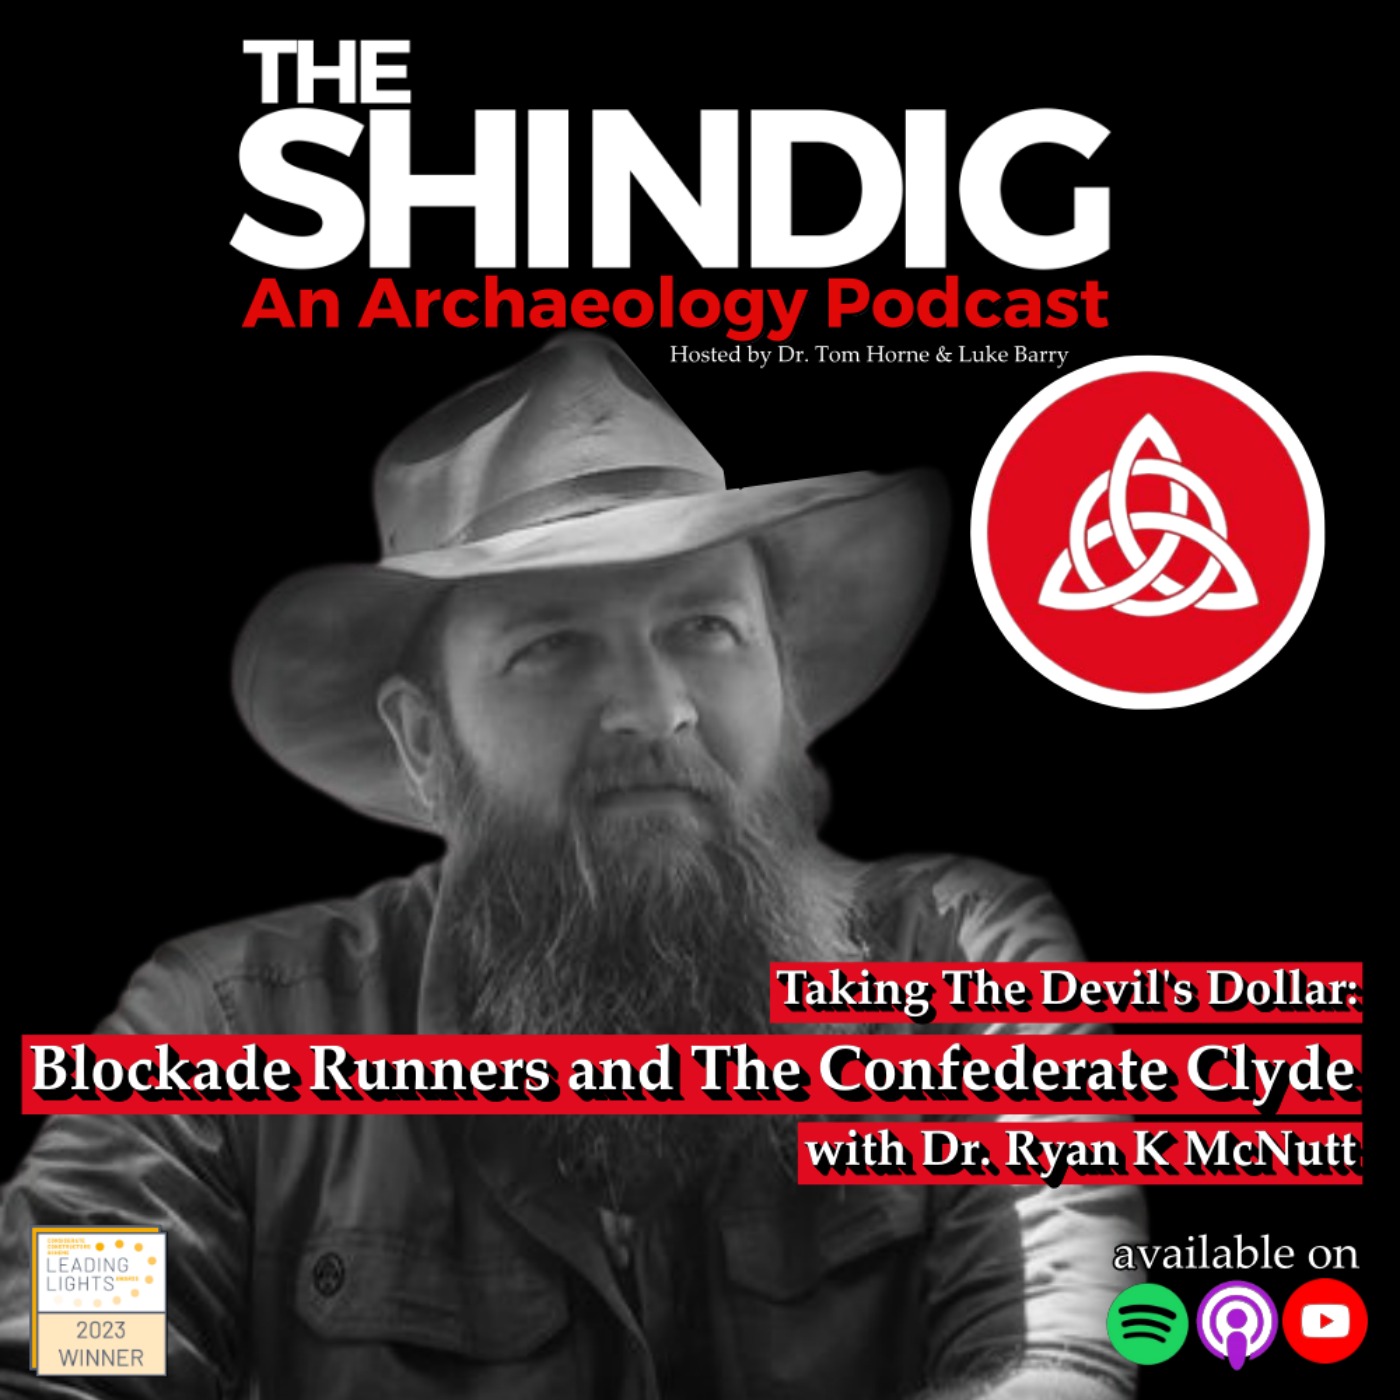 Taking The Devil’s Dollar: Blockade Runners and The Confederate Clyde with Dr. Ryan K McNutt